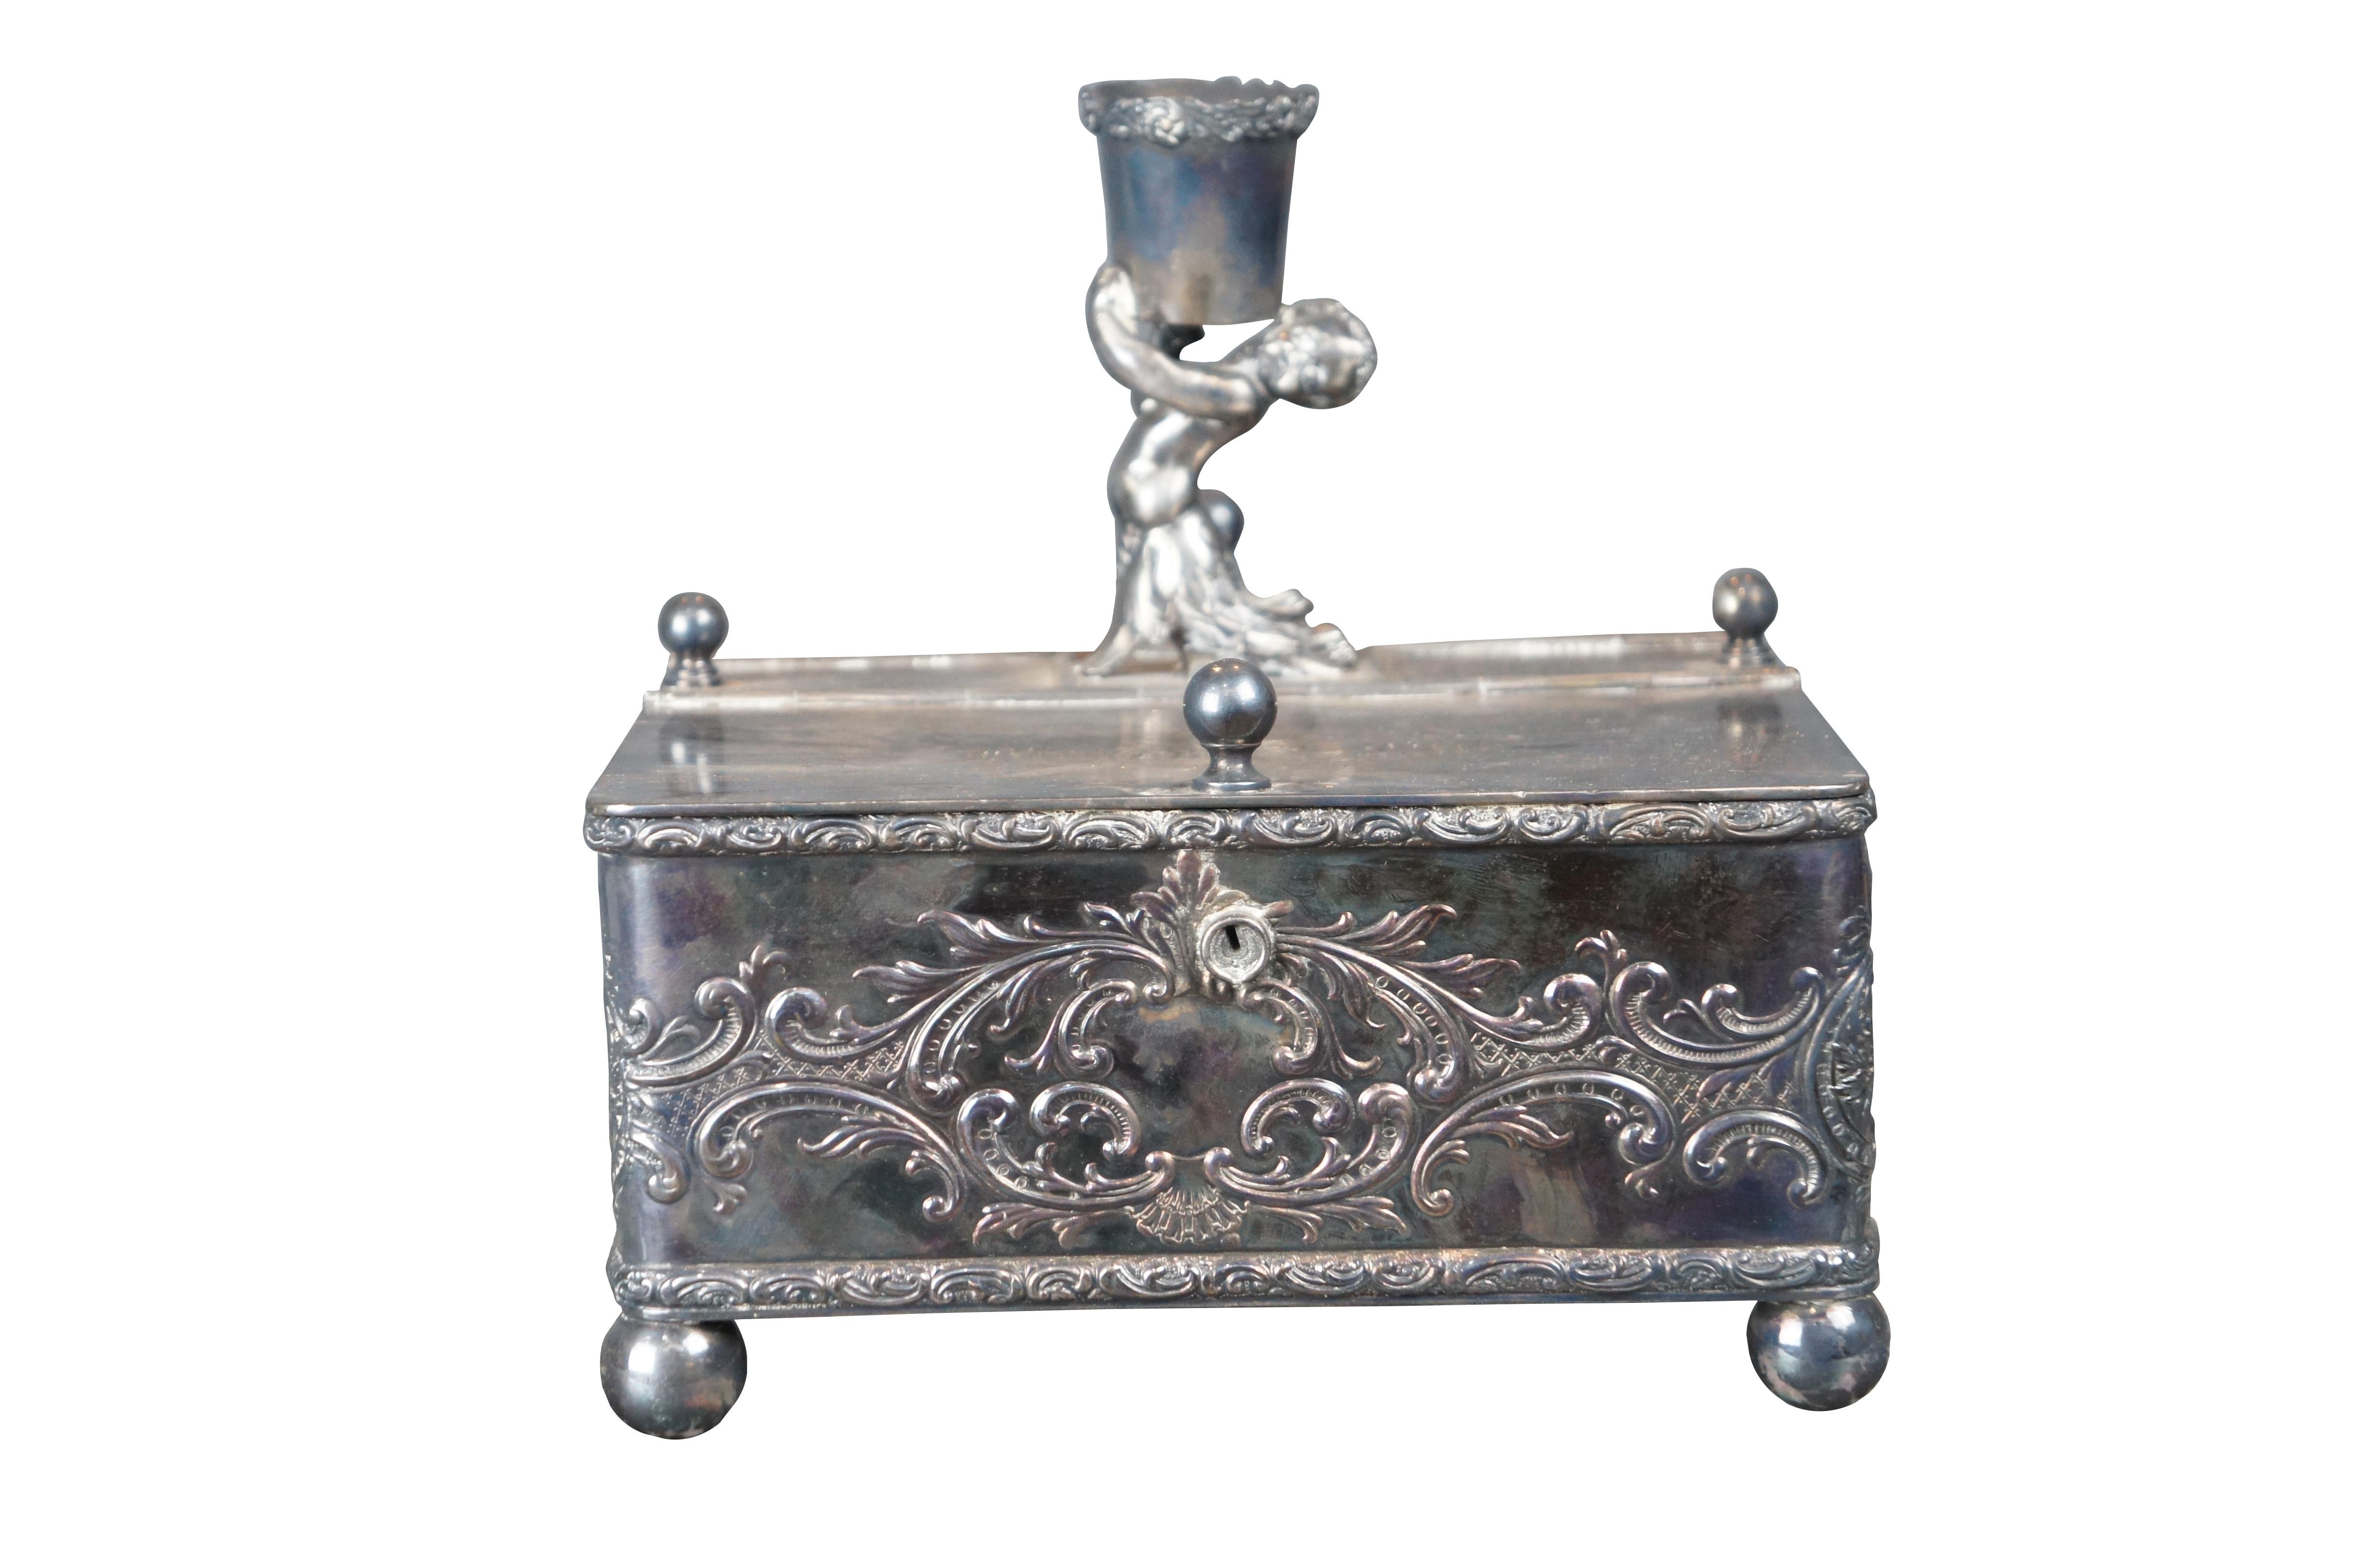 A divided Humidor by Meriden B. Company, Circa 1898. Made from silverplate with chased baroque pattern. The footed box has two large compartments and two small opening that allow access to the center. Along the top is a cherub holding a candleholder